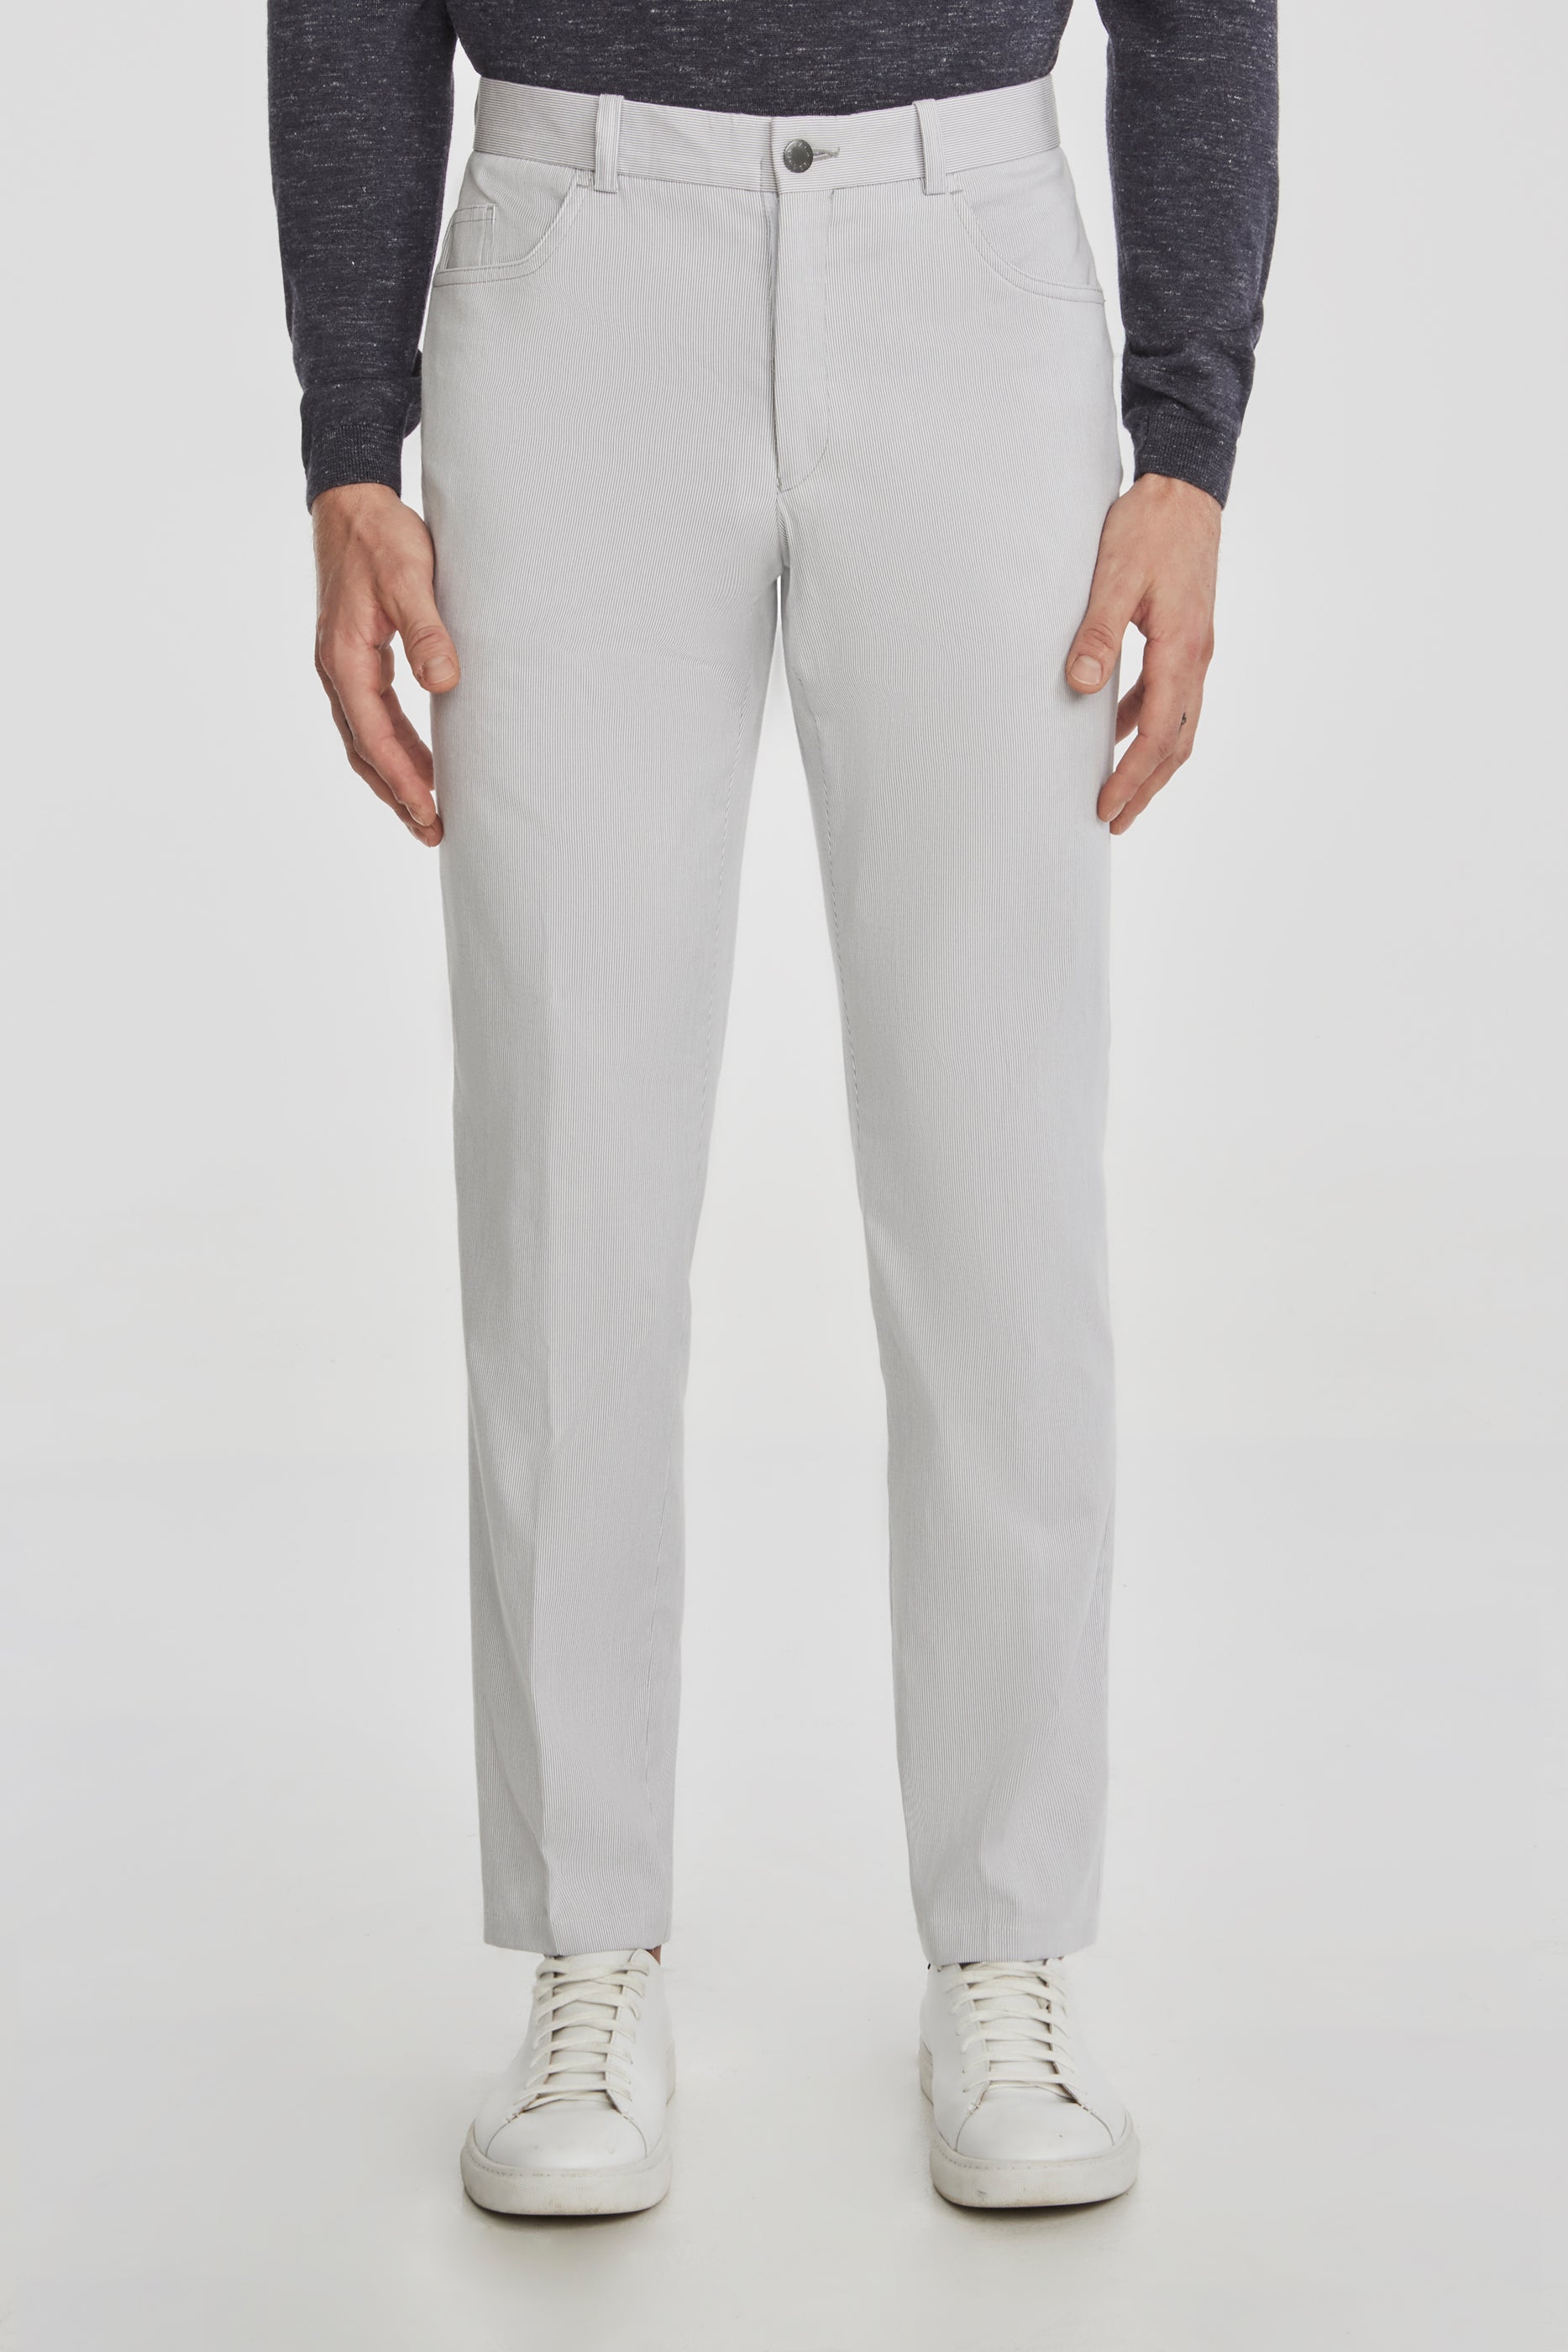 Alt view Pinfeather Sage 5-Pocket Stretch Cotton Pant in Light Grey